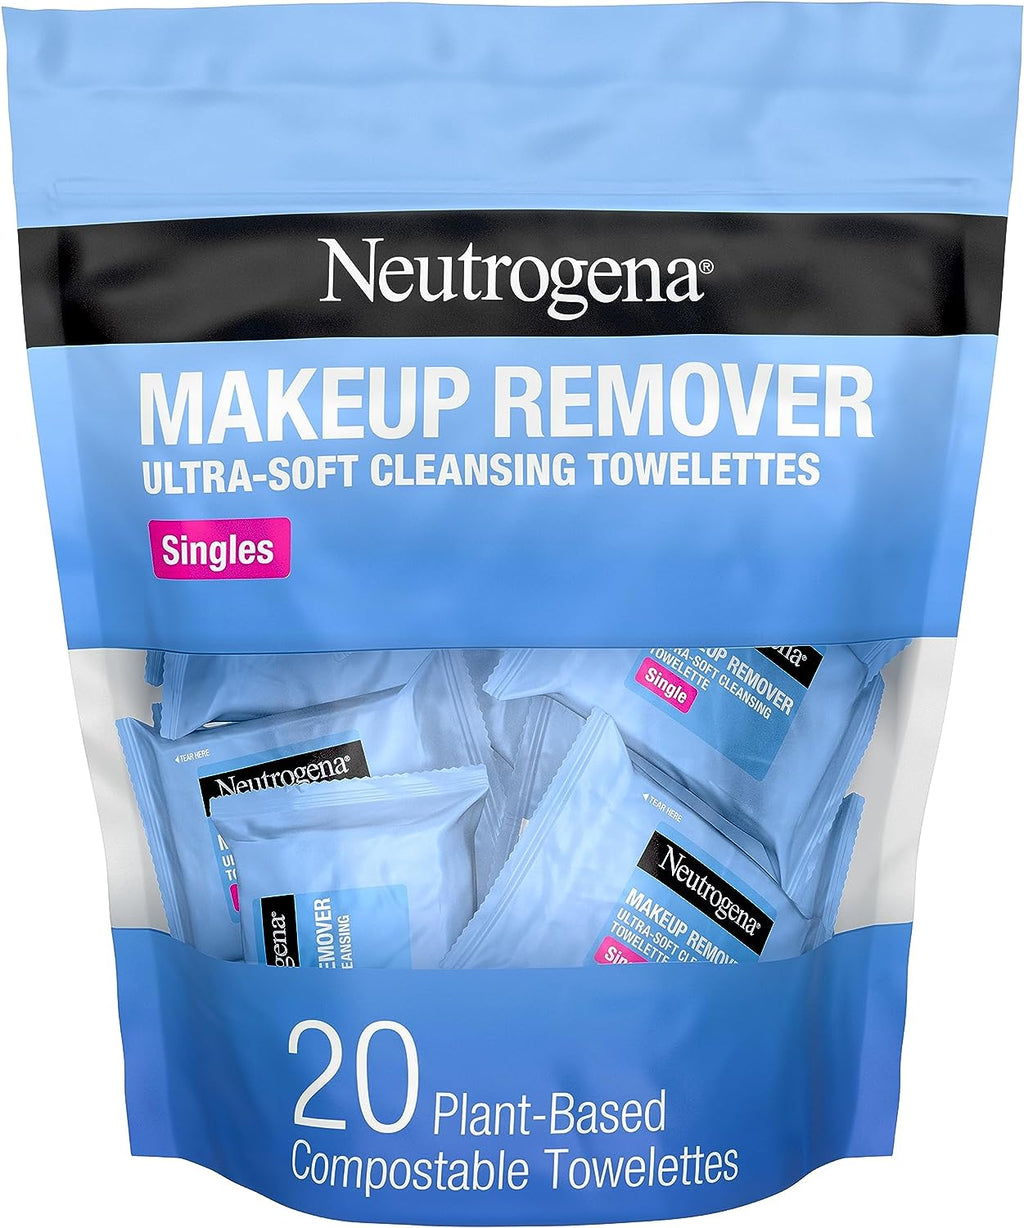 Neutrogena Makeup Remover Facial Cleansing Towelette Singles, 20